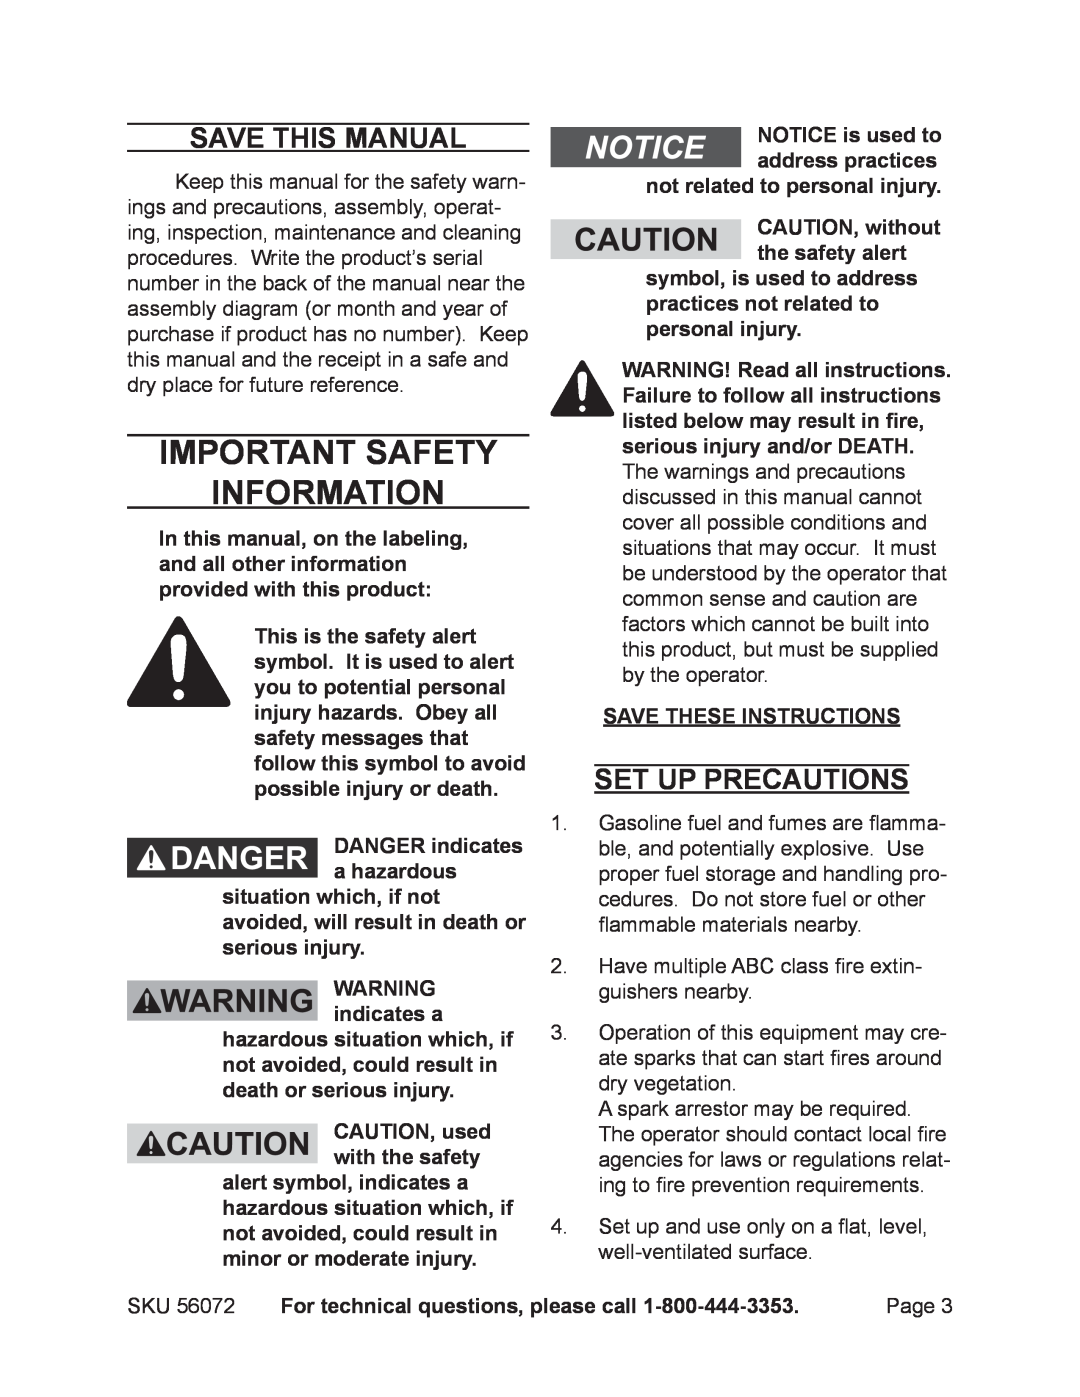 Harbor Freight Tools 56072 manual Important SAFETY Information, Save This Manual, Set up precautions 